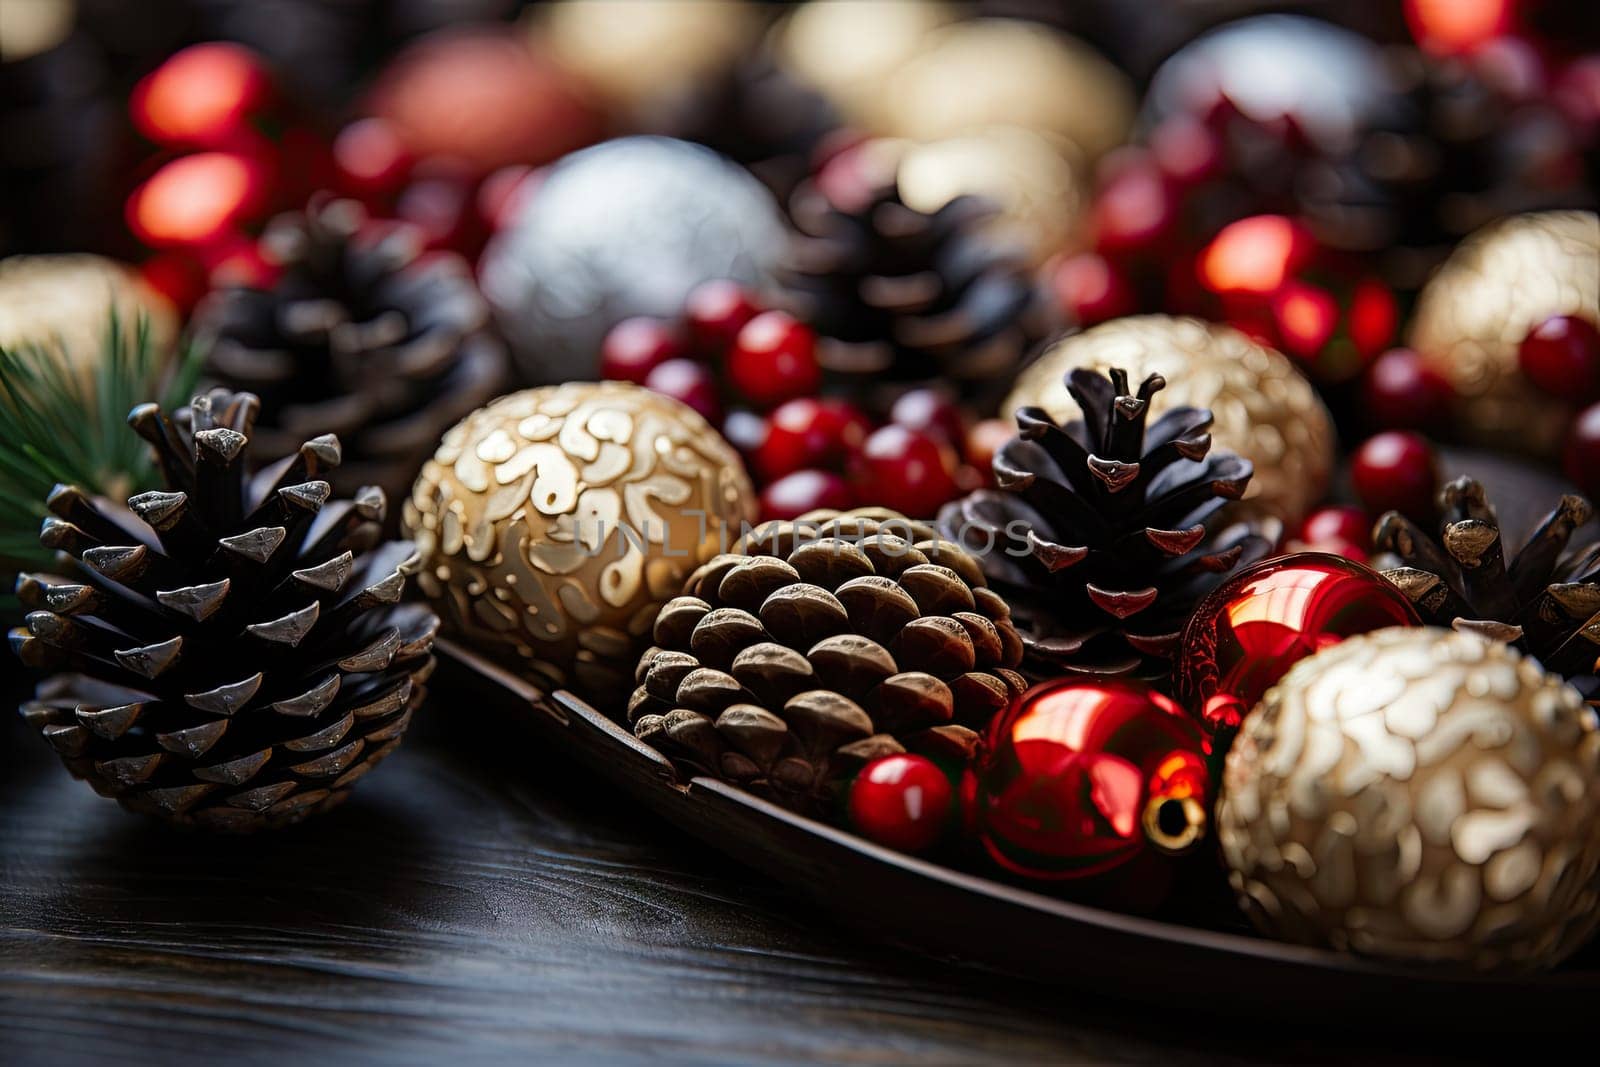 A Plate Filled With Festive Christmas Decorations and Fragrant Pine Cones Created With Generative AI Technology